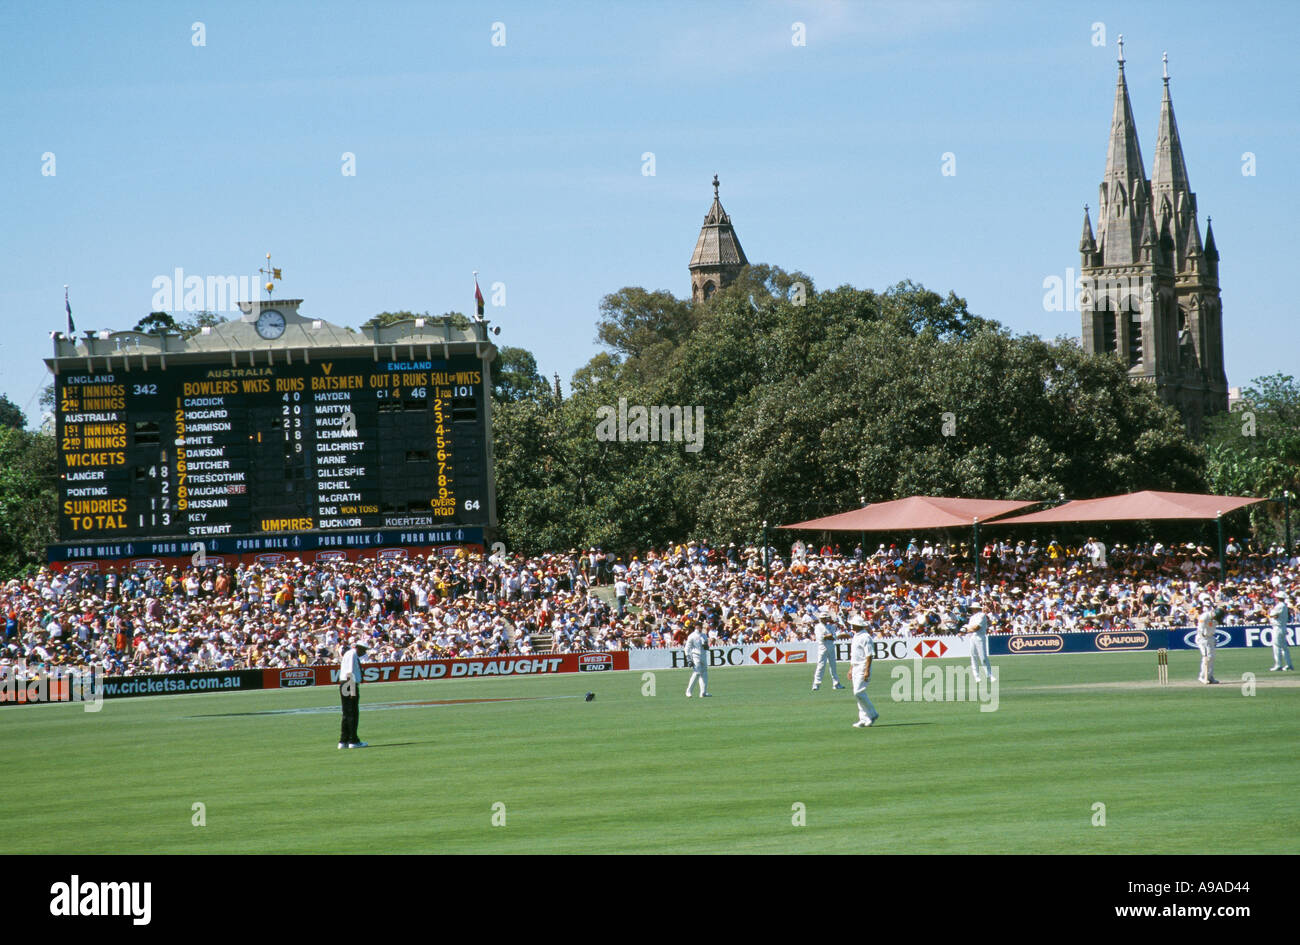 Australia playing England in a Test match at Adelaide Oval in November 2002 Stock Photo